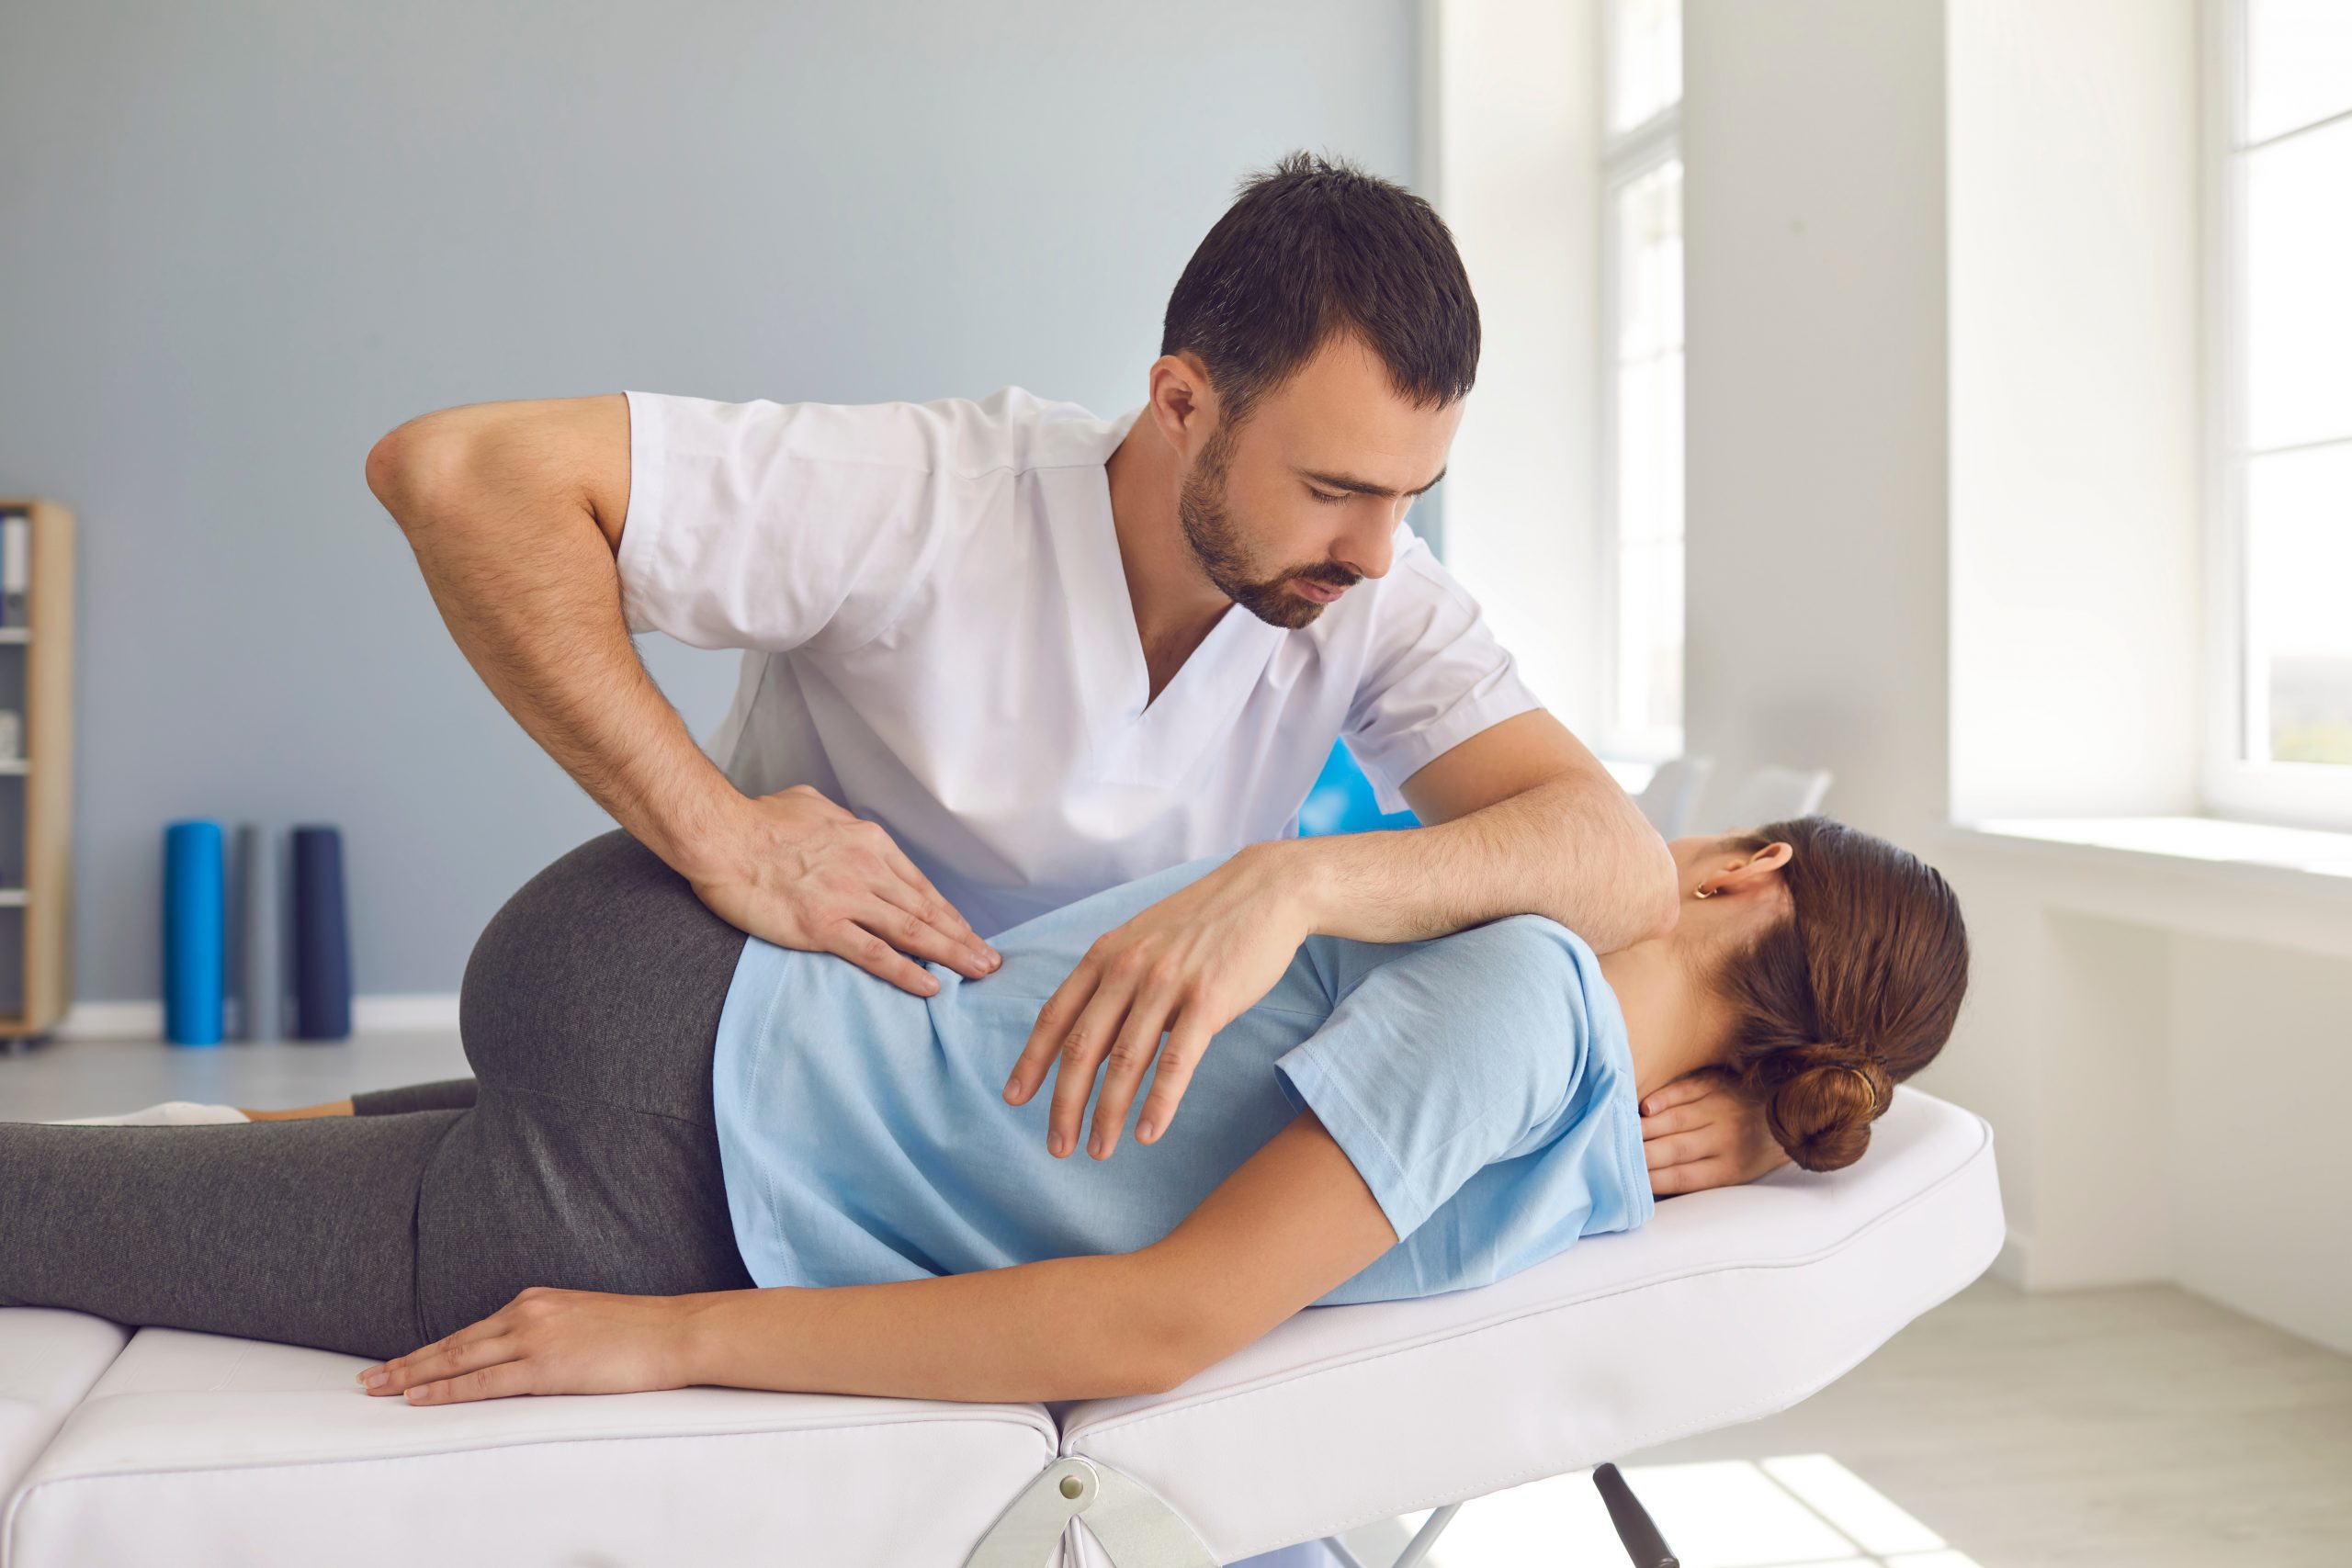 movements and changes , lumbar spine and chiropractic procedures